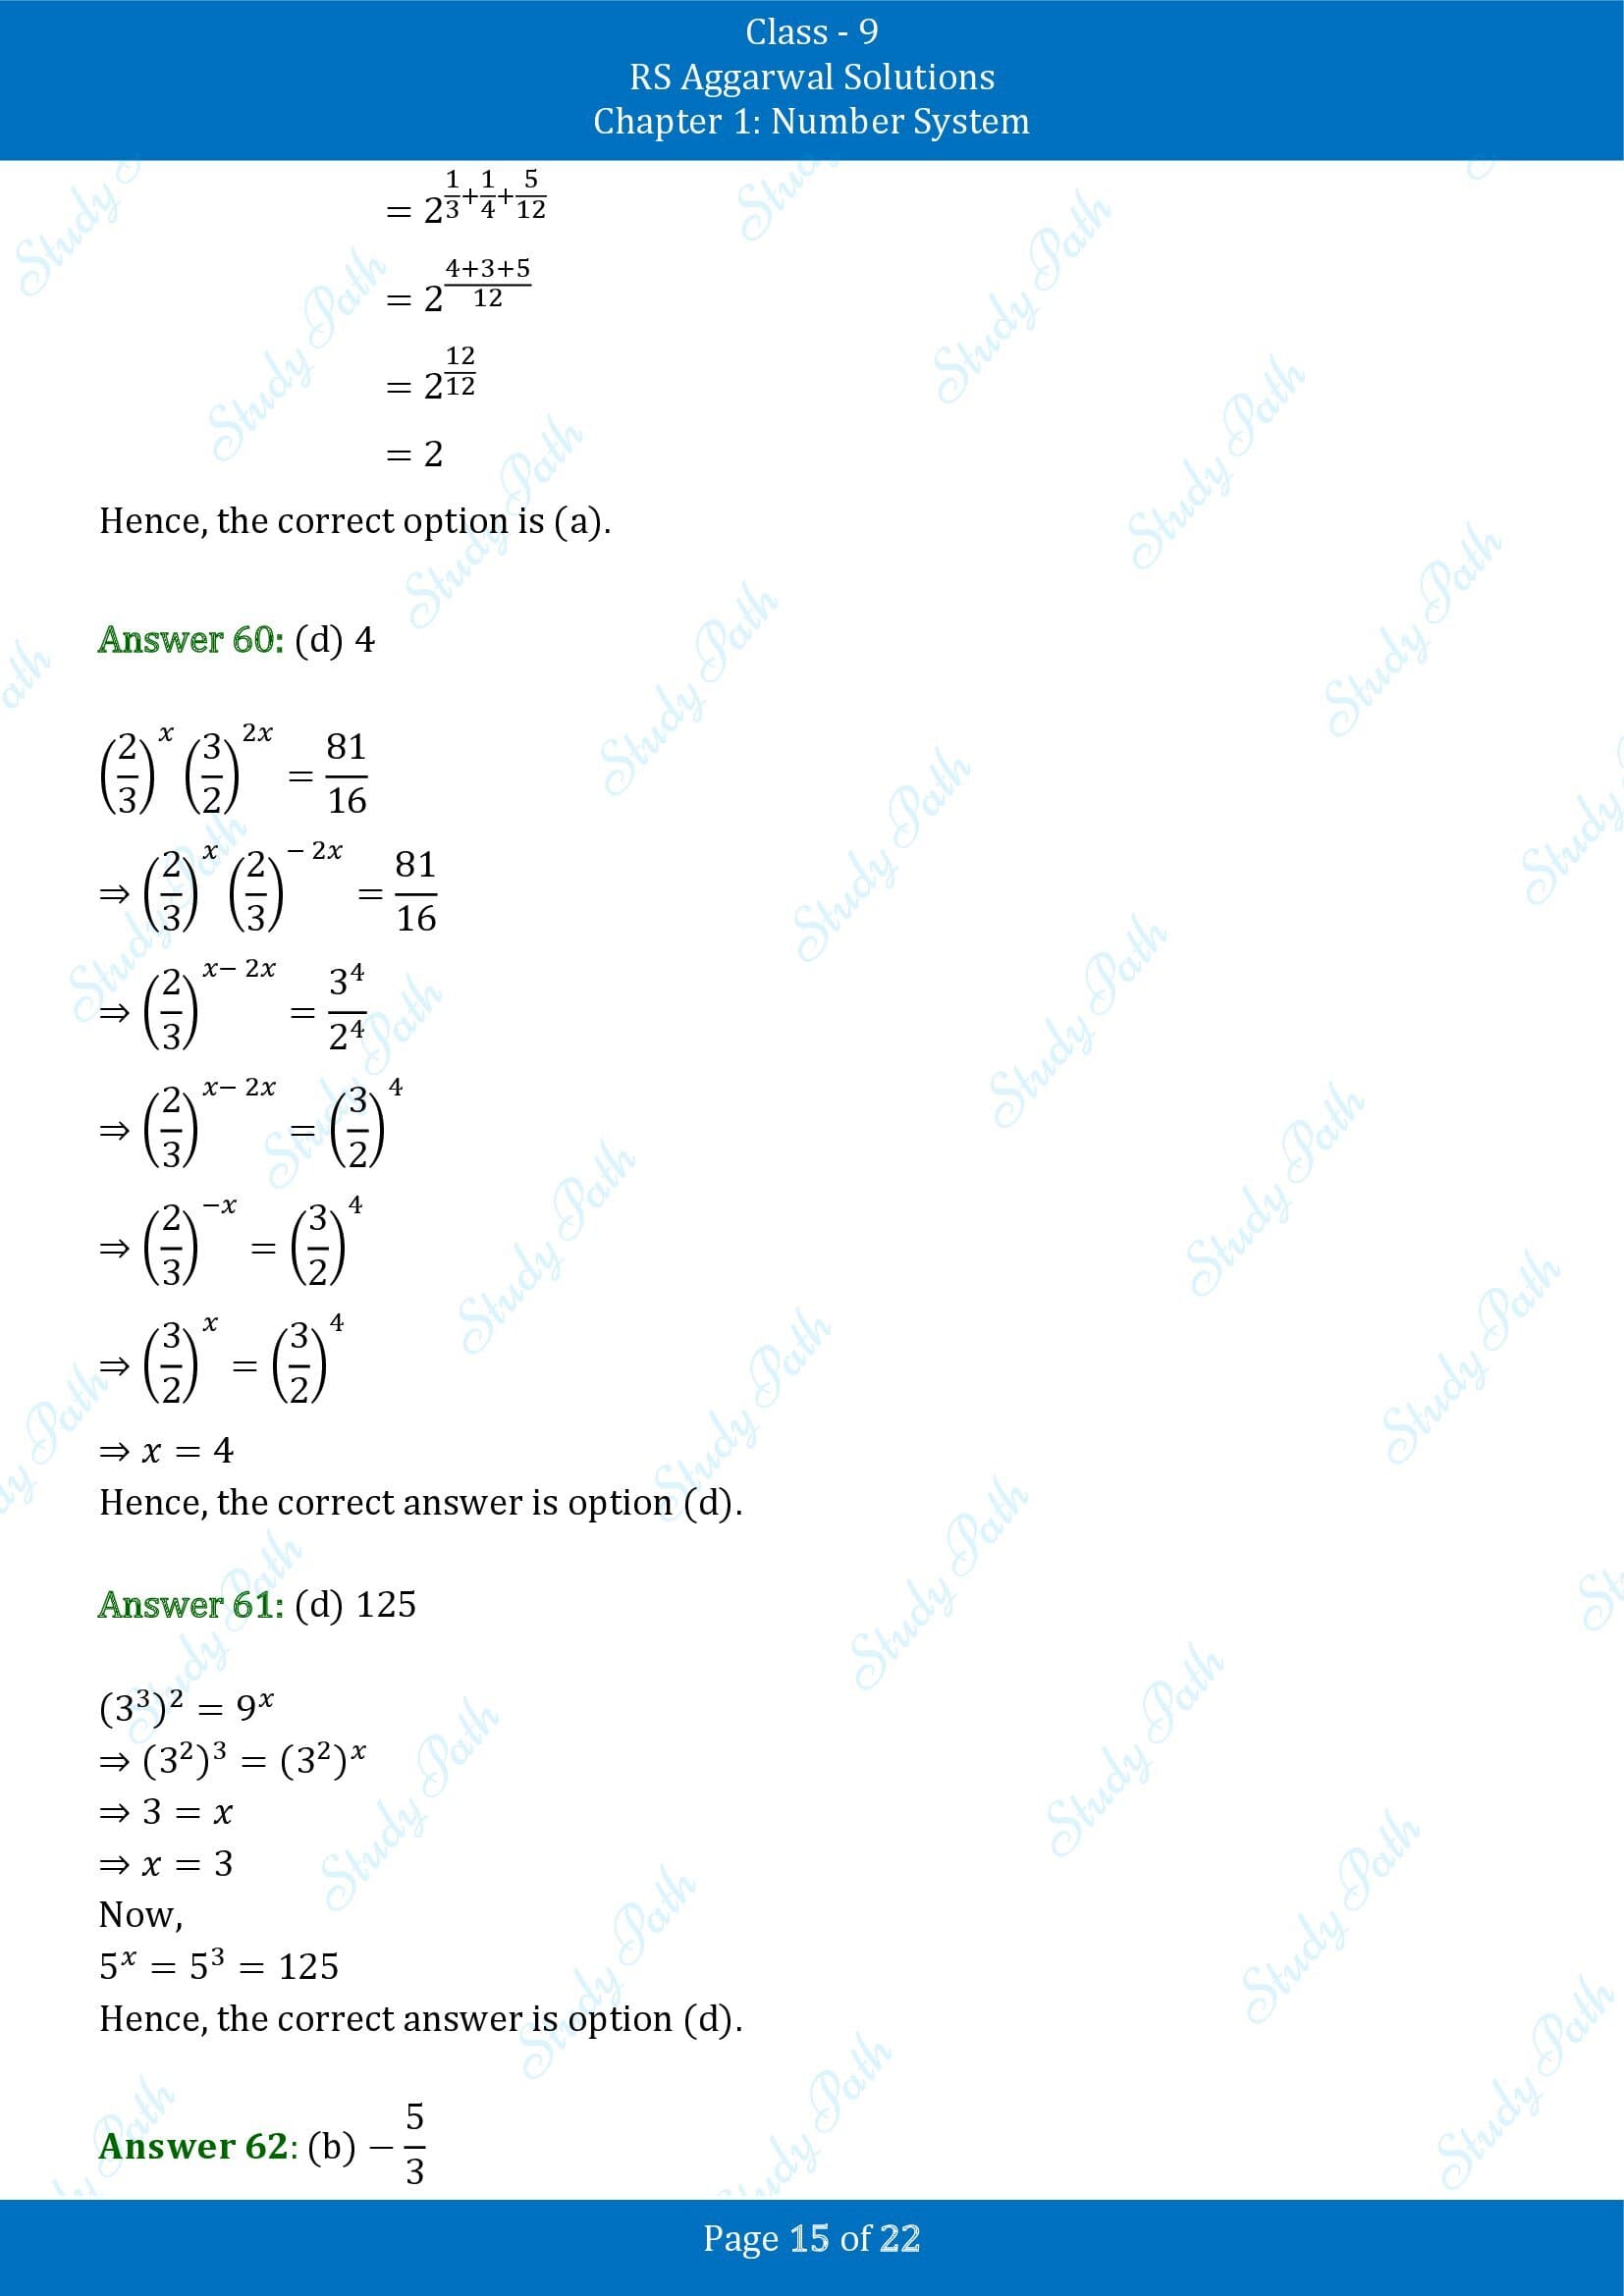 RS Aggarwal Solutions Class 9 Chapter 1 Number System Multiple Choice Questions MCQs 00015